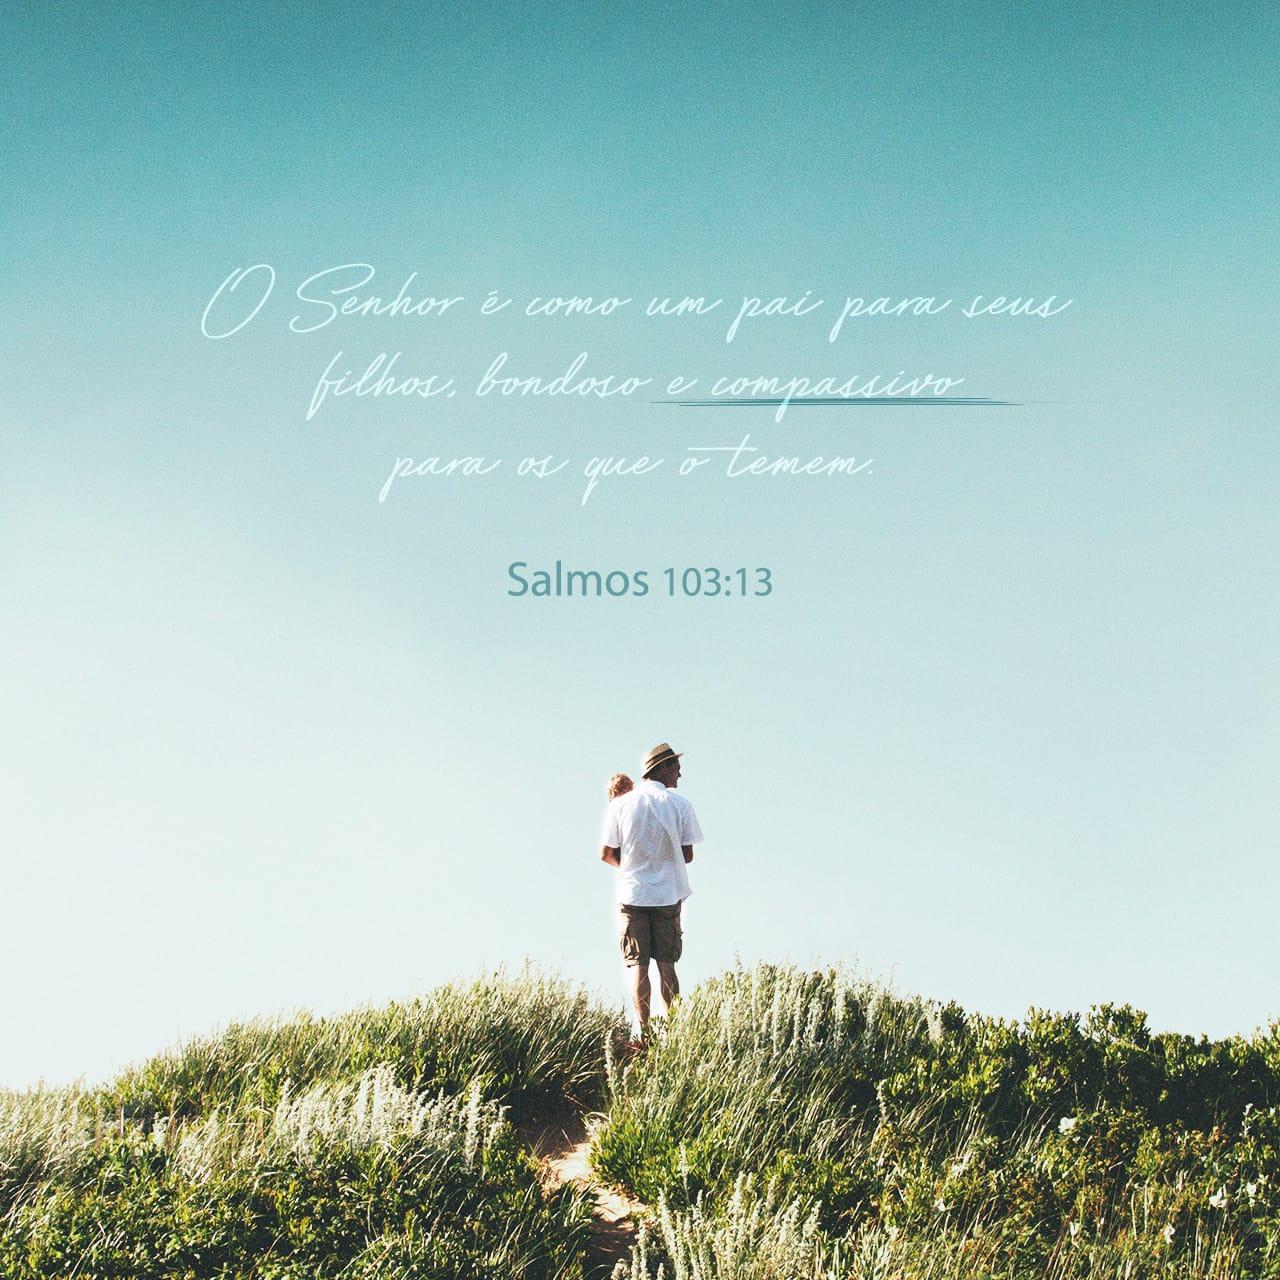 Bible Verse of the Day - day 85 - image 36160 (Salmos 103:13)